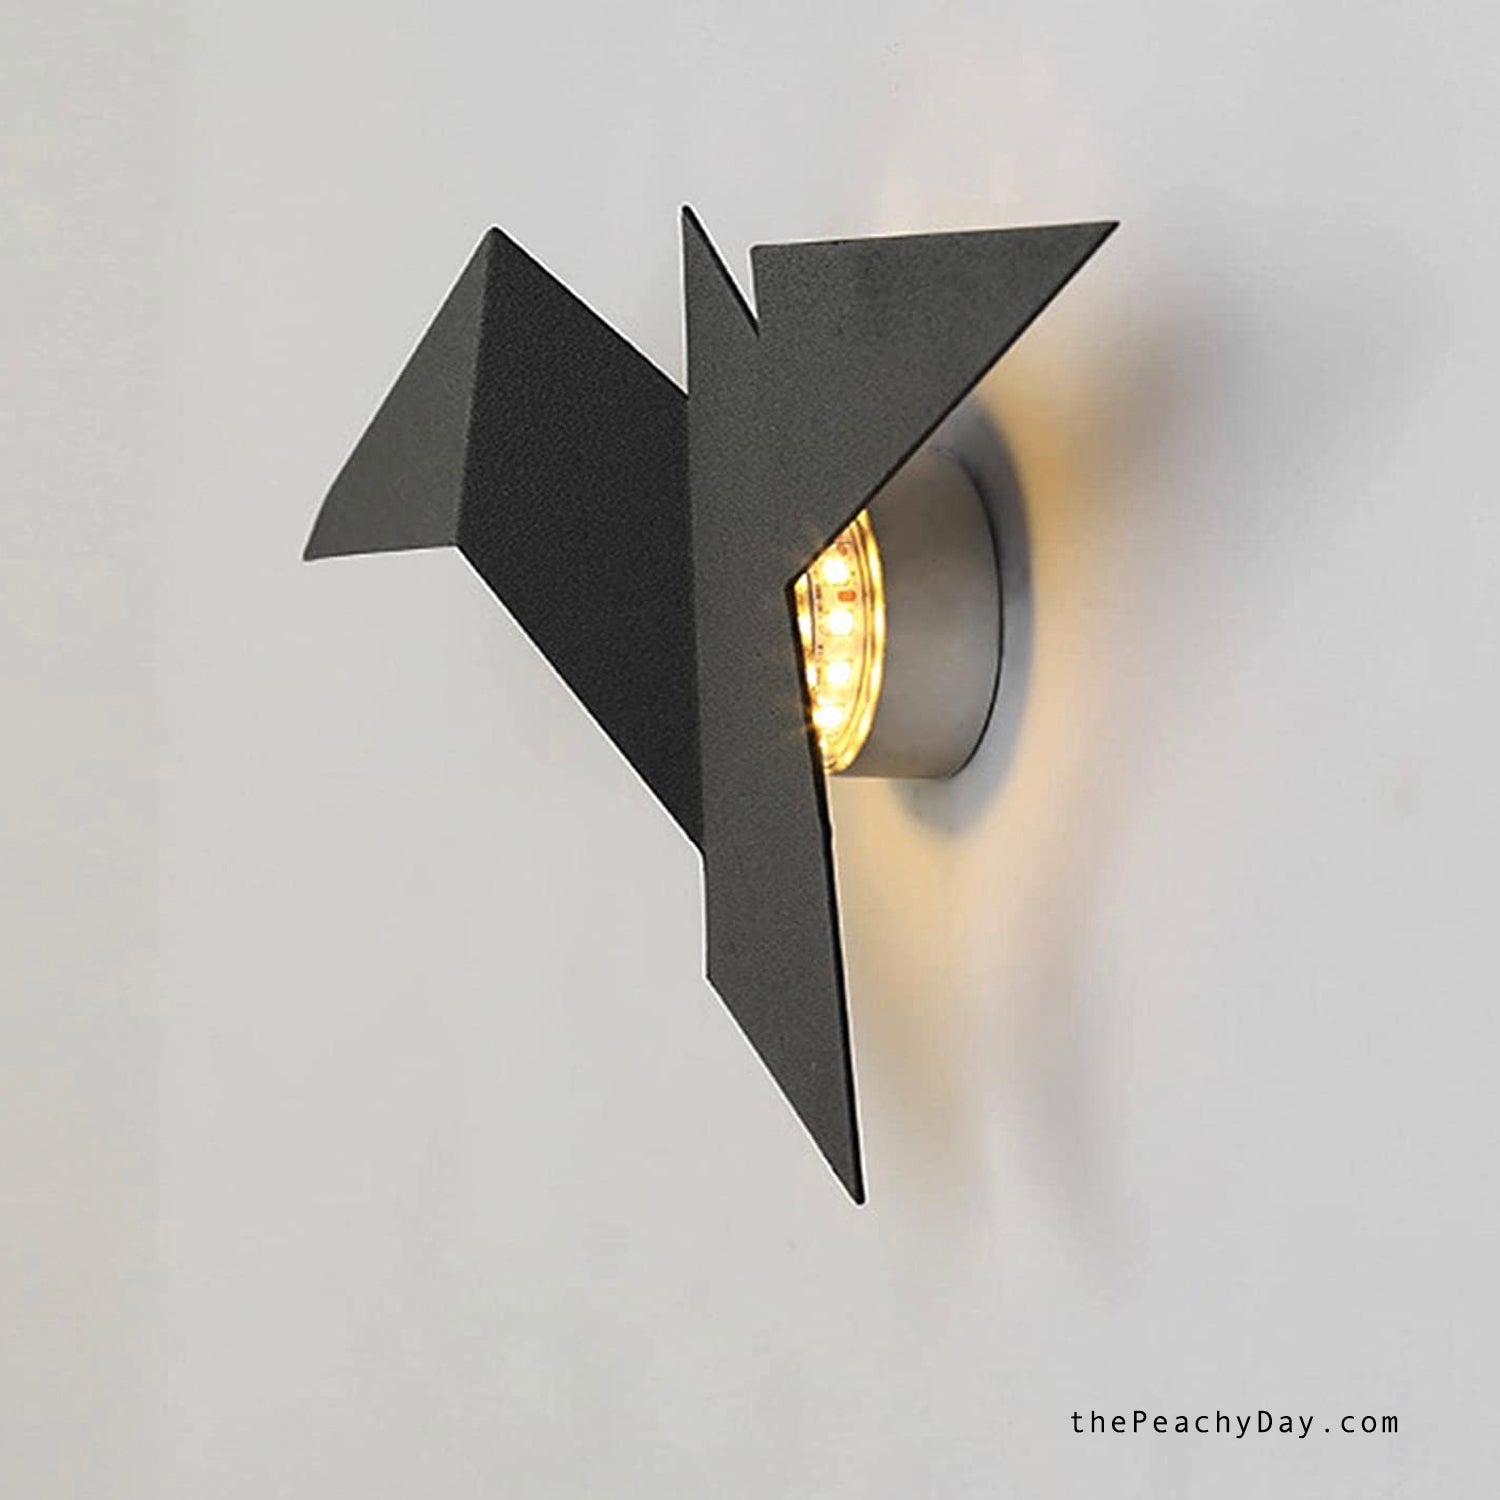 Modern Led Wall Lamp Iron Bird swallow Wall Lamps Living Room Bedroom Home Decor Stairs Light Bedside Wall Light Fixtures wall decorations LED Flying Bird Wall Lamp Wall Sconce Lighting Fixtures Interior Modern Indoor Lighting Night Lights for Home Cafe Bedroom Loft Study Corridor